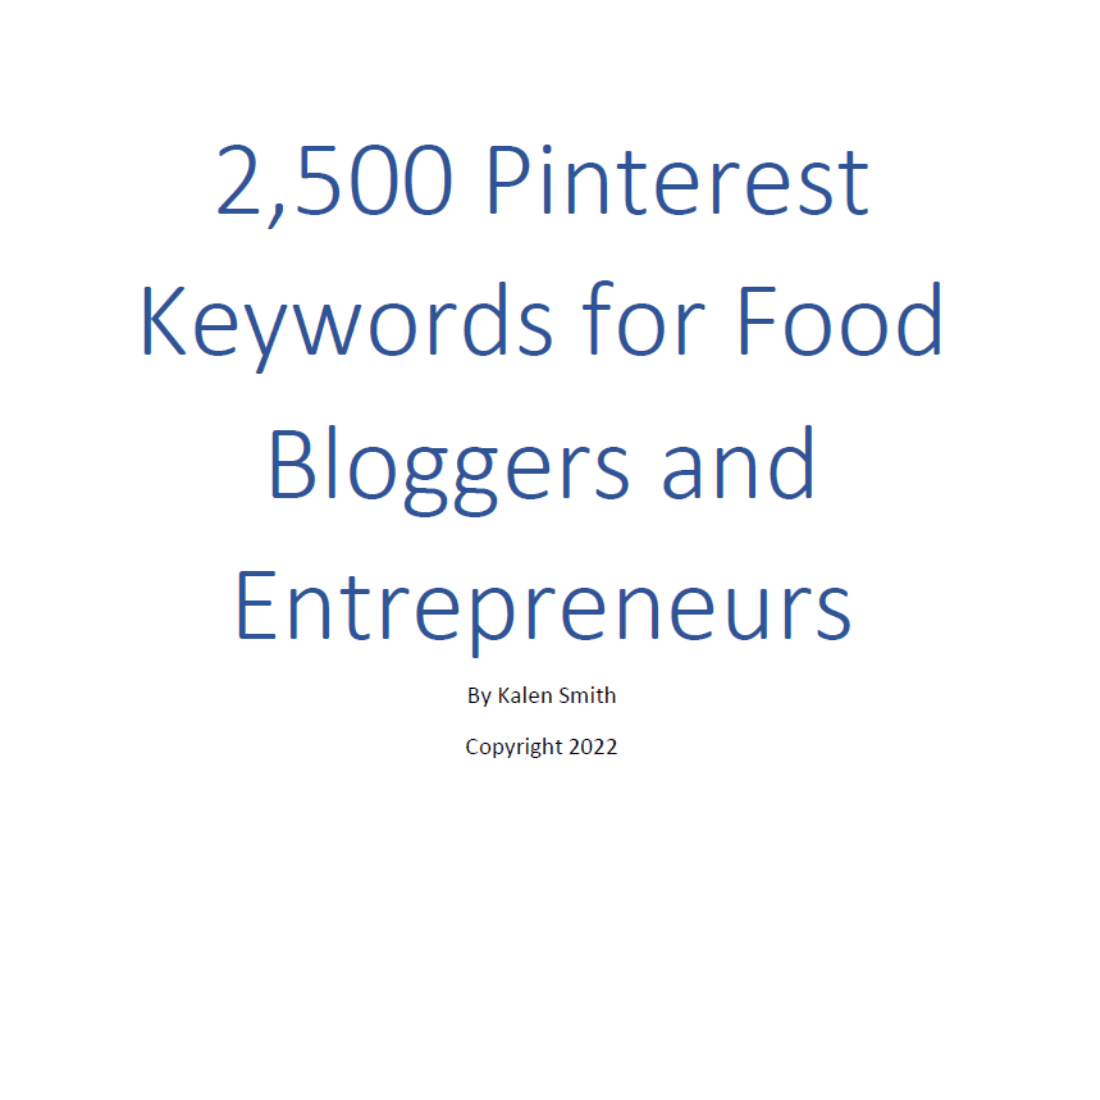 Pinterest Mastery Kit and Pin Templates for Food Bloggers and Entrepreneurs